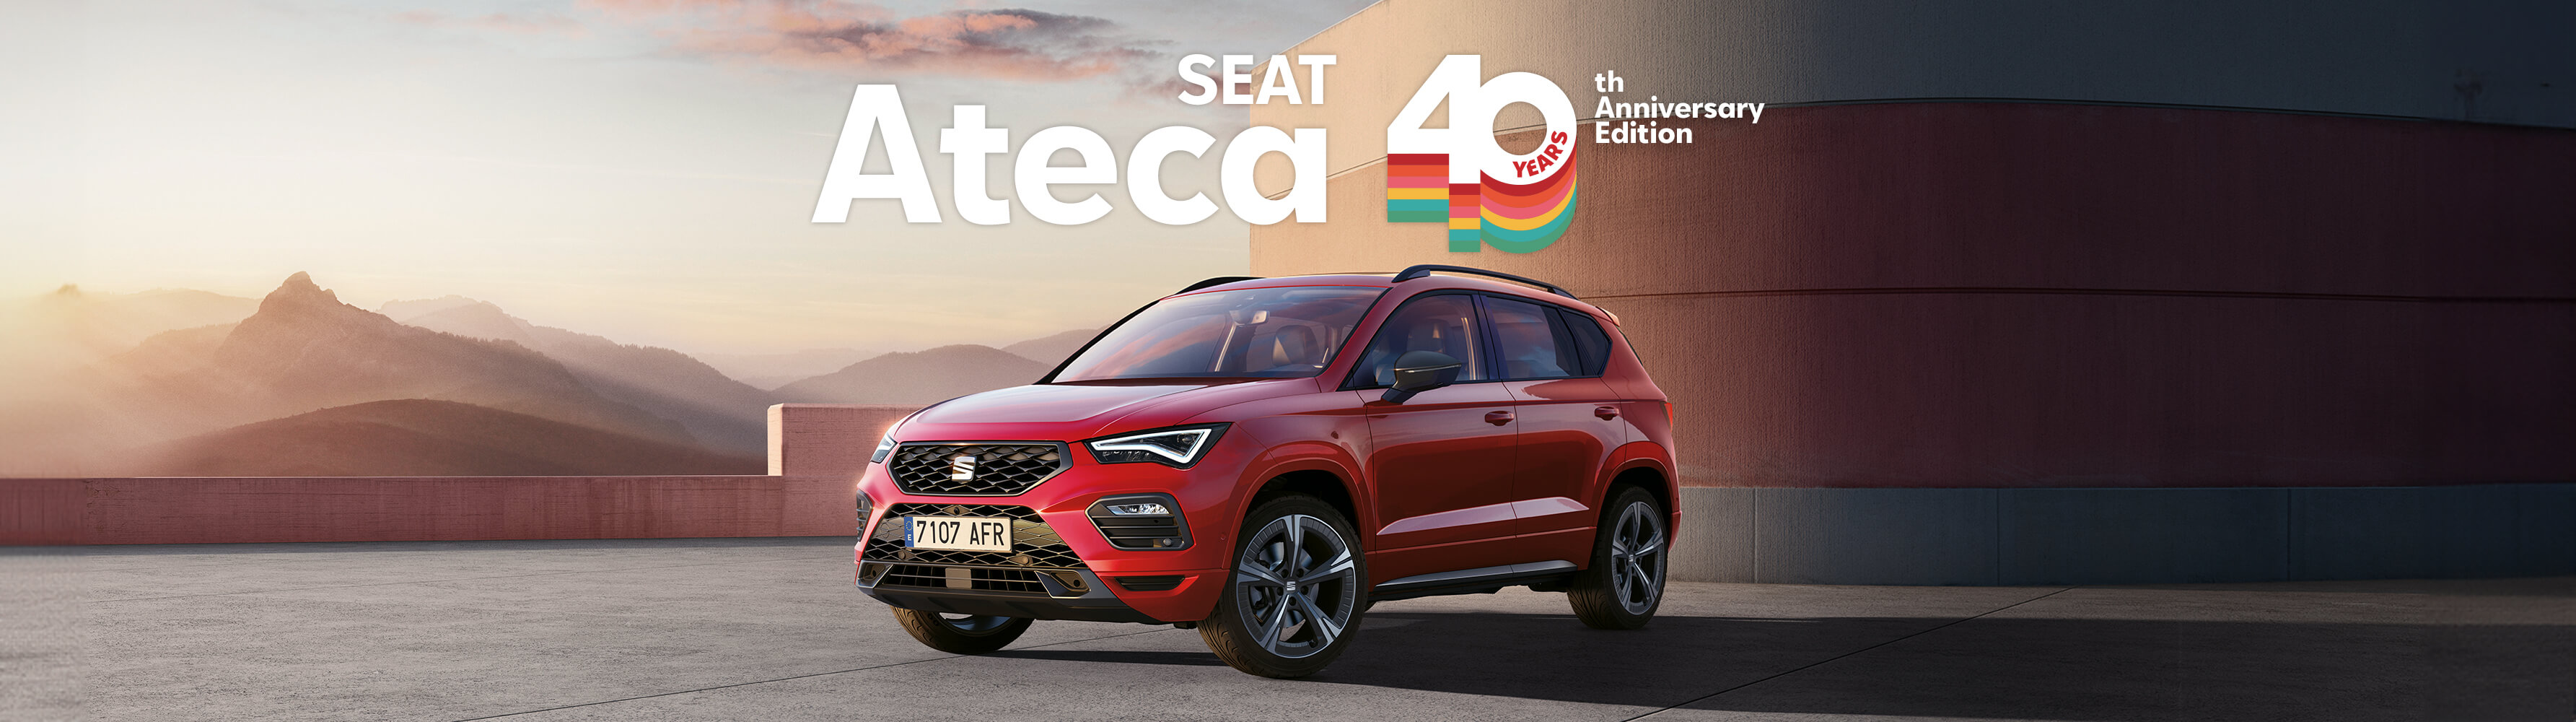 SEAT Ateca suv front side view